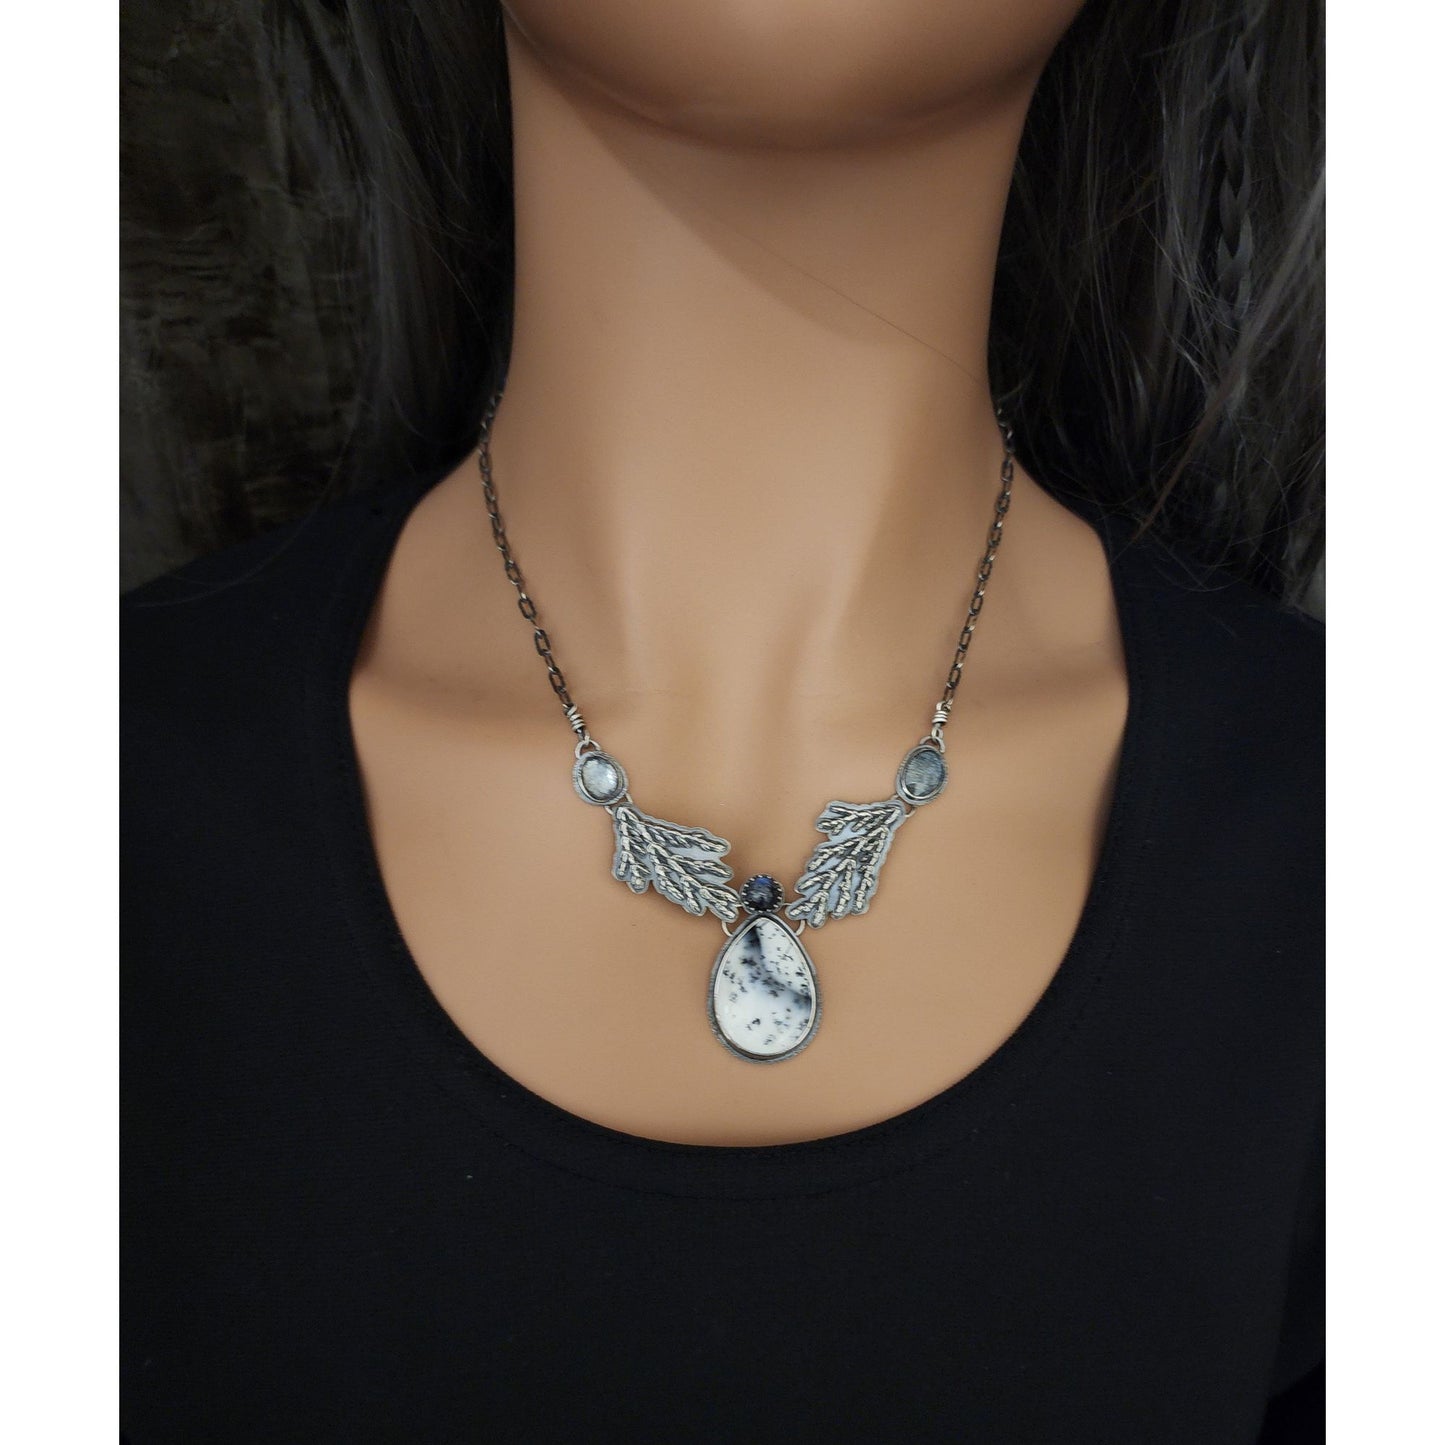 Queen Of The North necklace